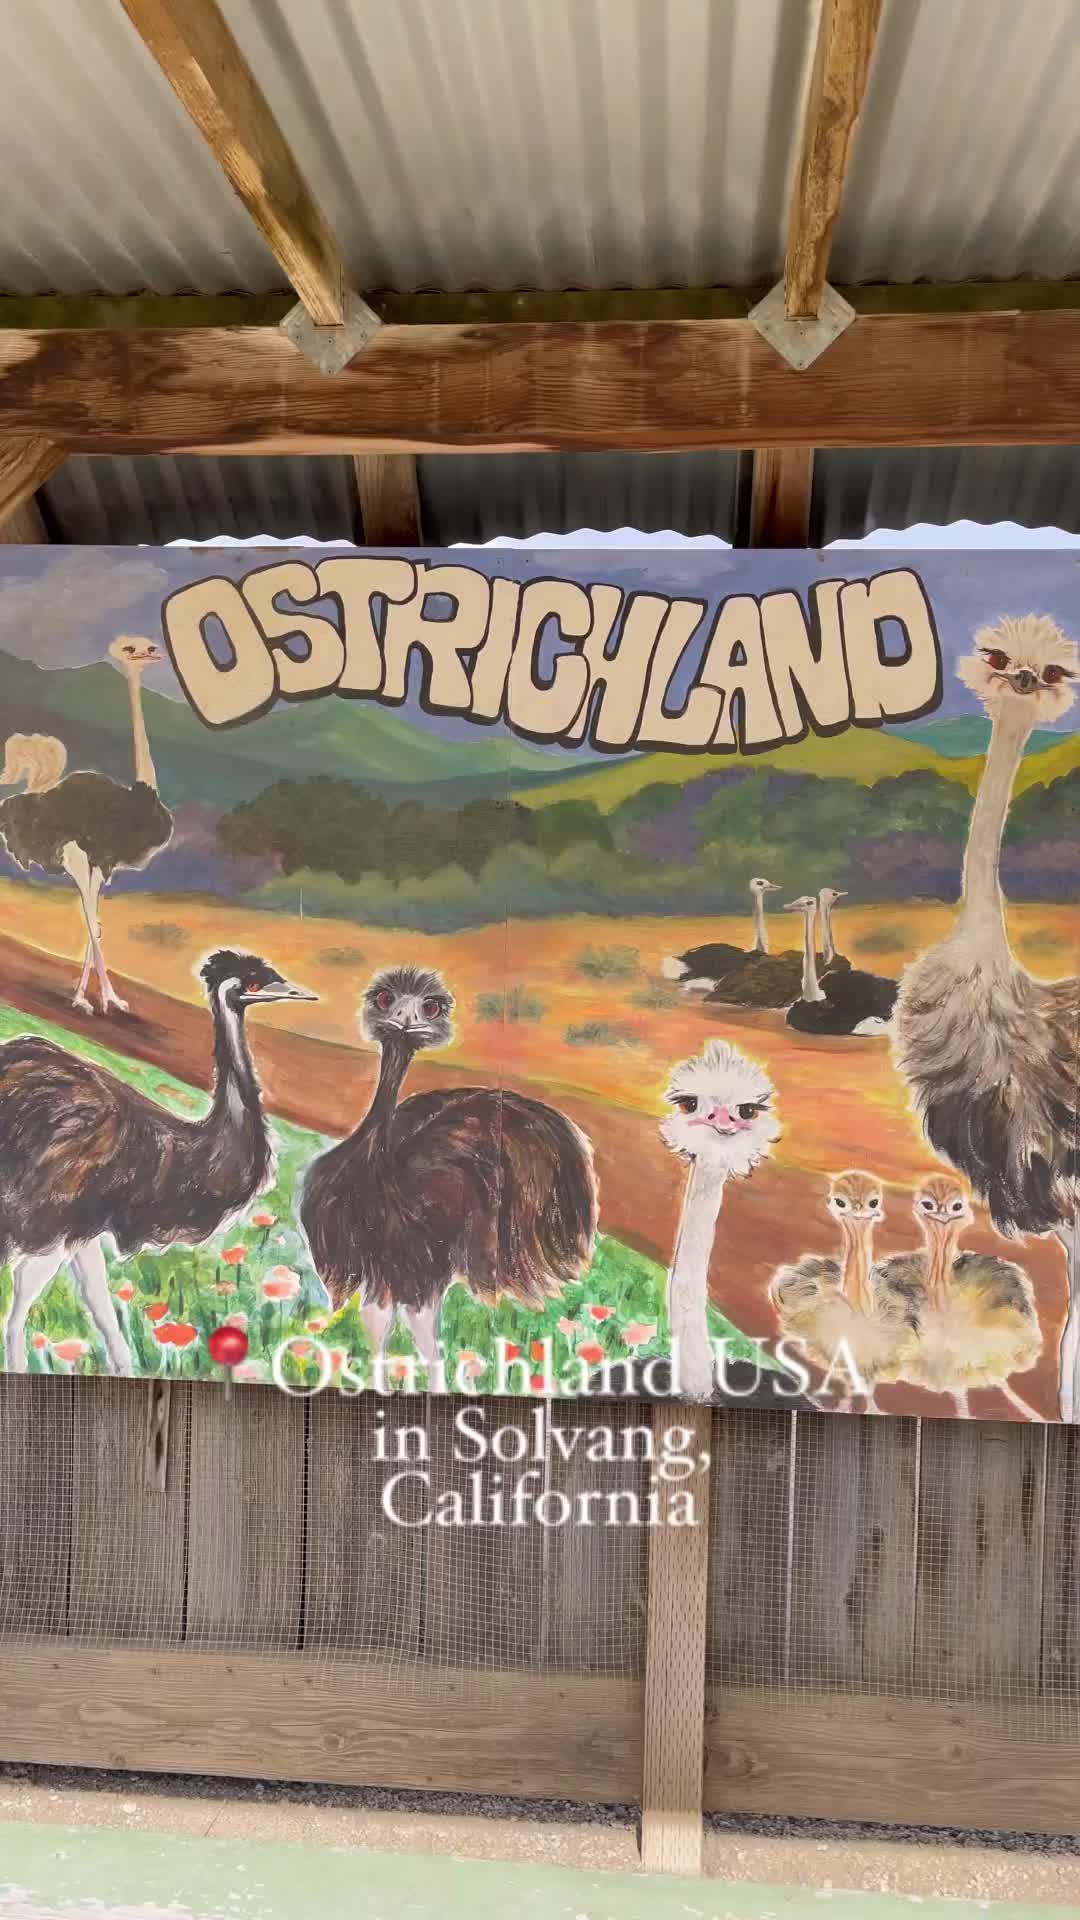 Feed Ostriches & Emus at Ostrichland USA in Solvang